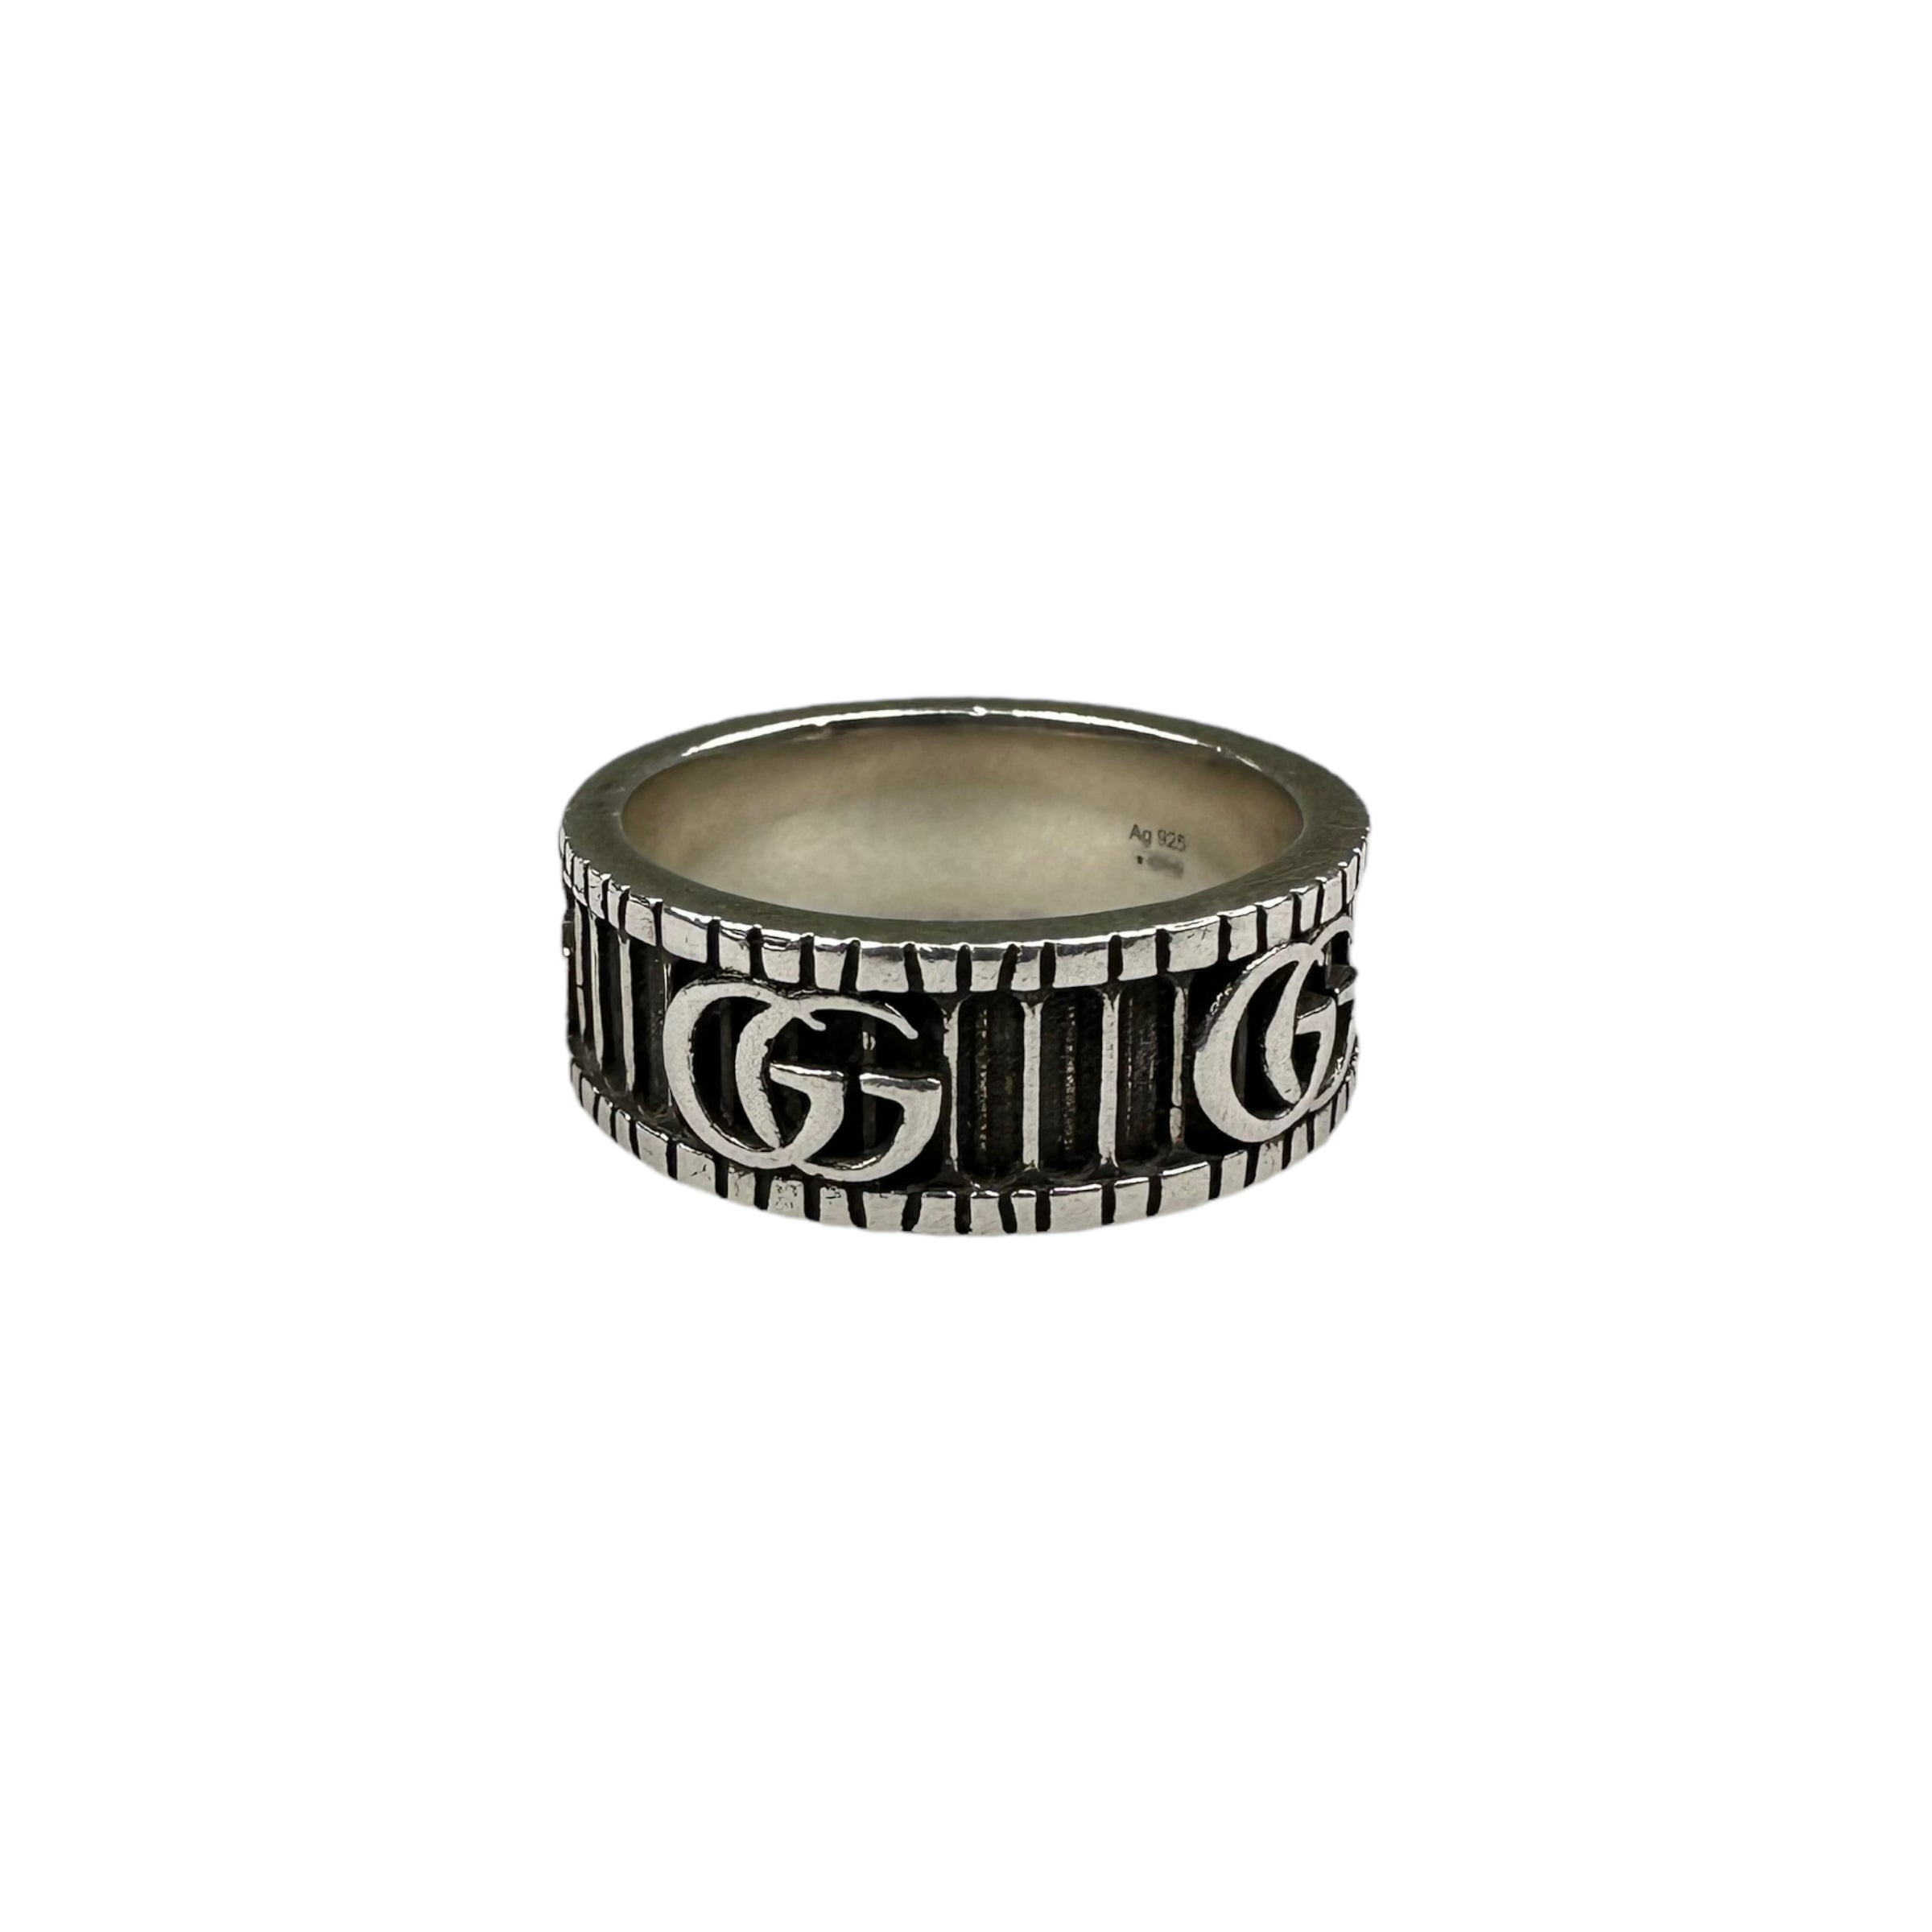 GUCCI DOUBLE G RING